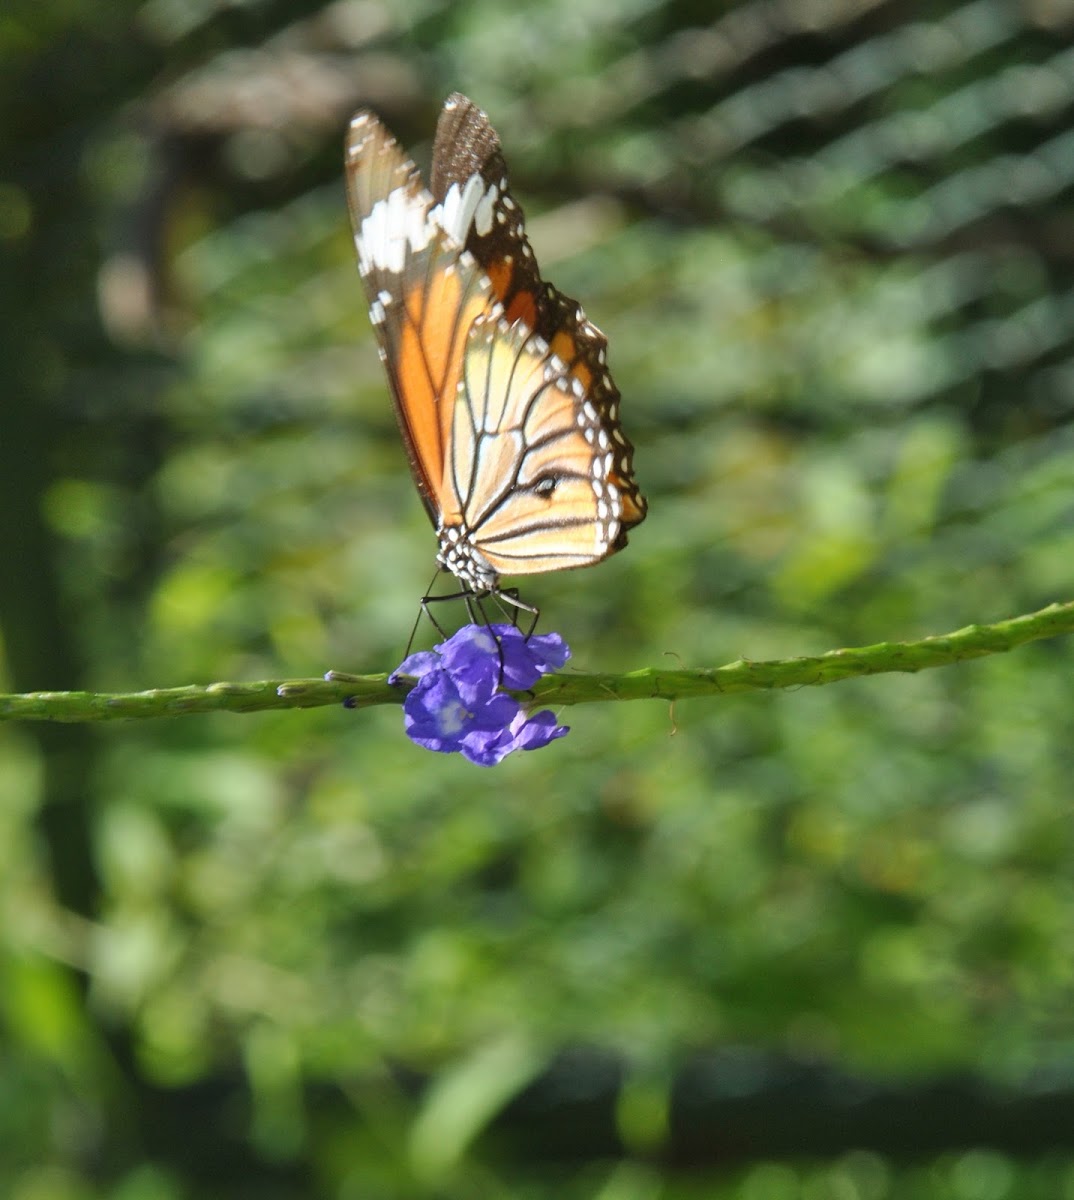 Common tiger butterfly